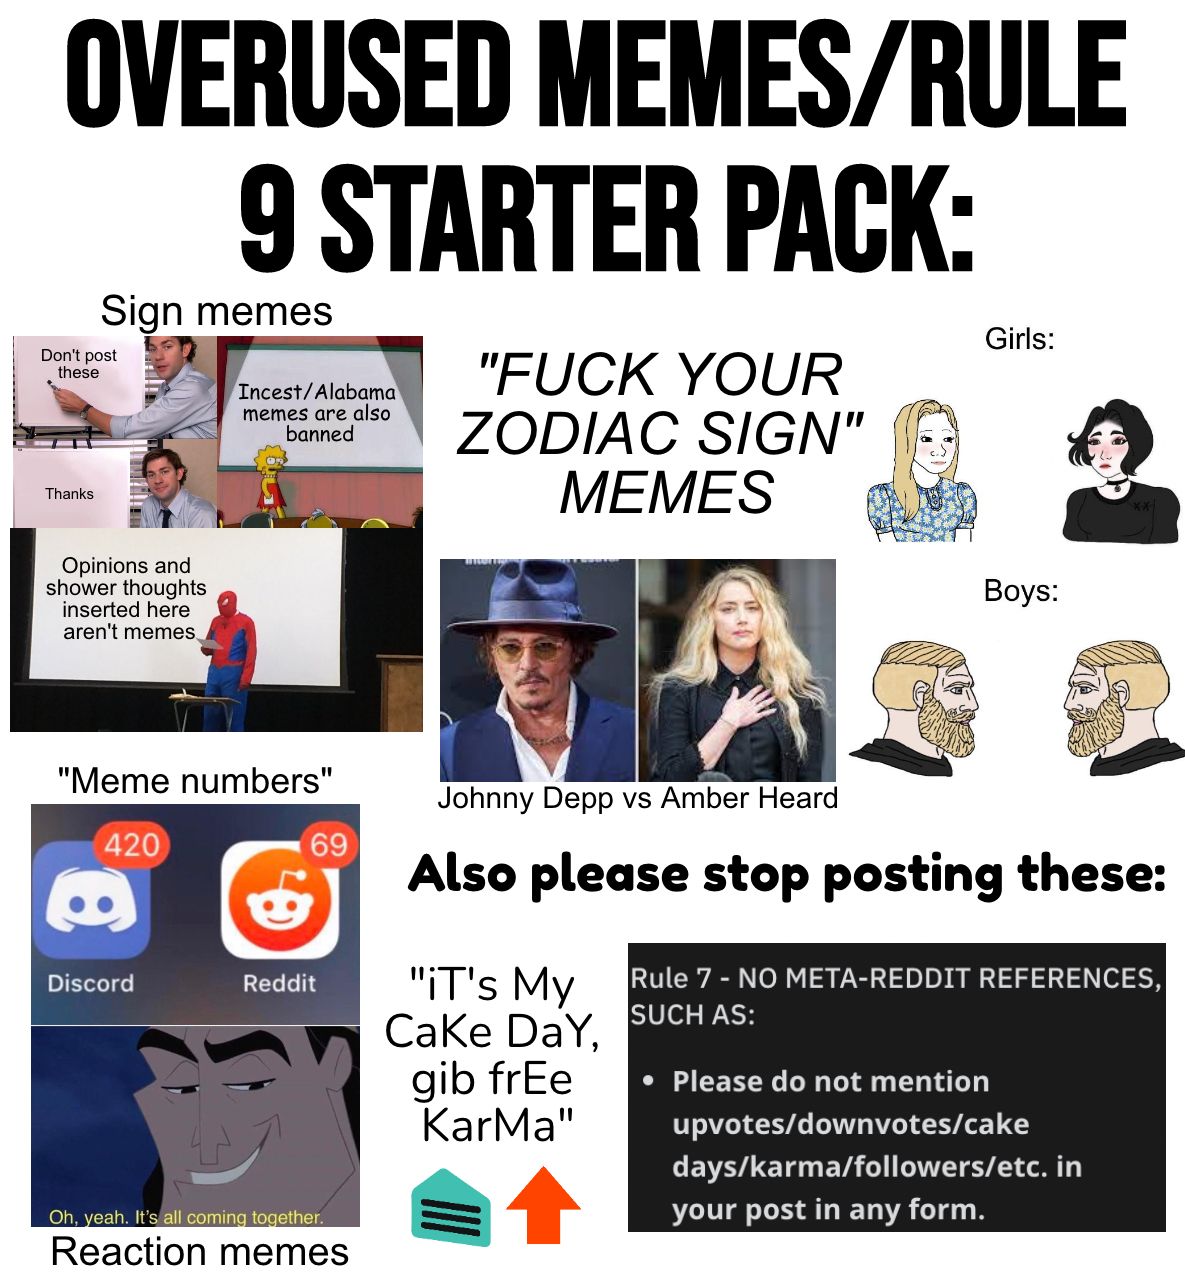 A reminder from the Mod team that these overused memes are banned! Be creative and keep the original memes coming!